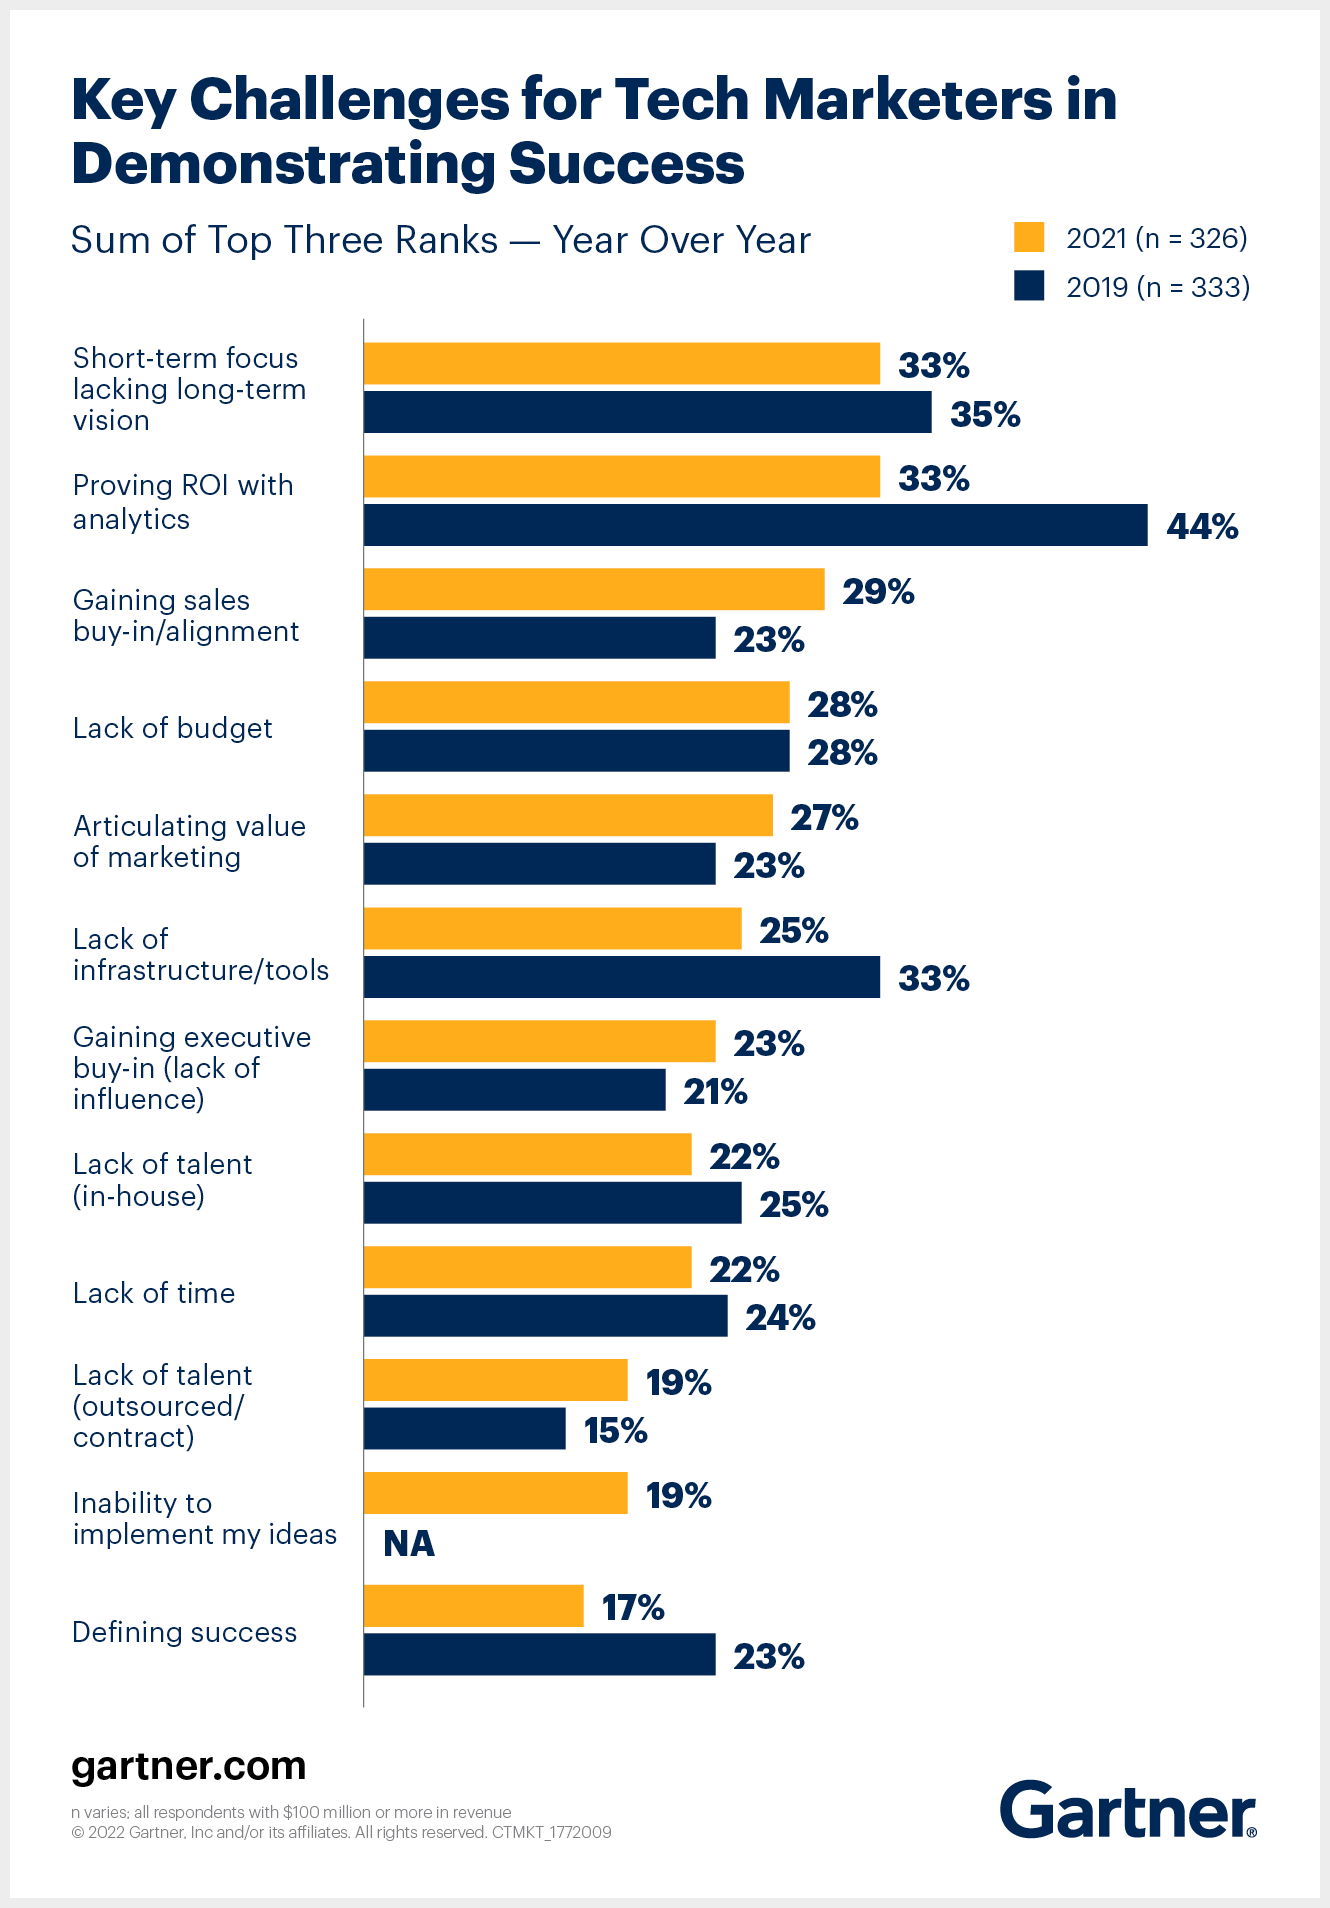 Key Challenges for Tech Marketers in Demonstrating Success